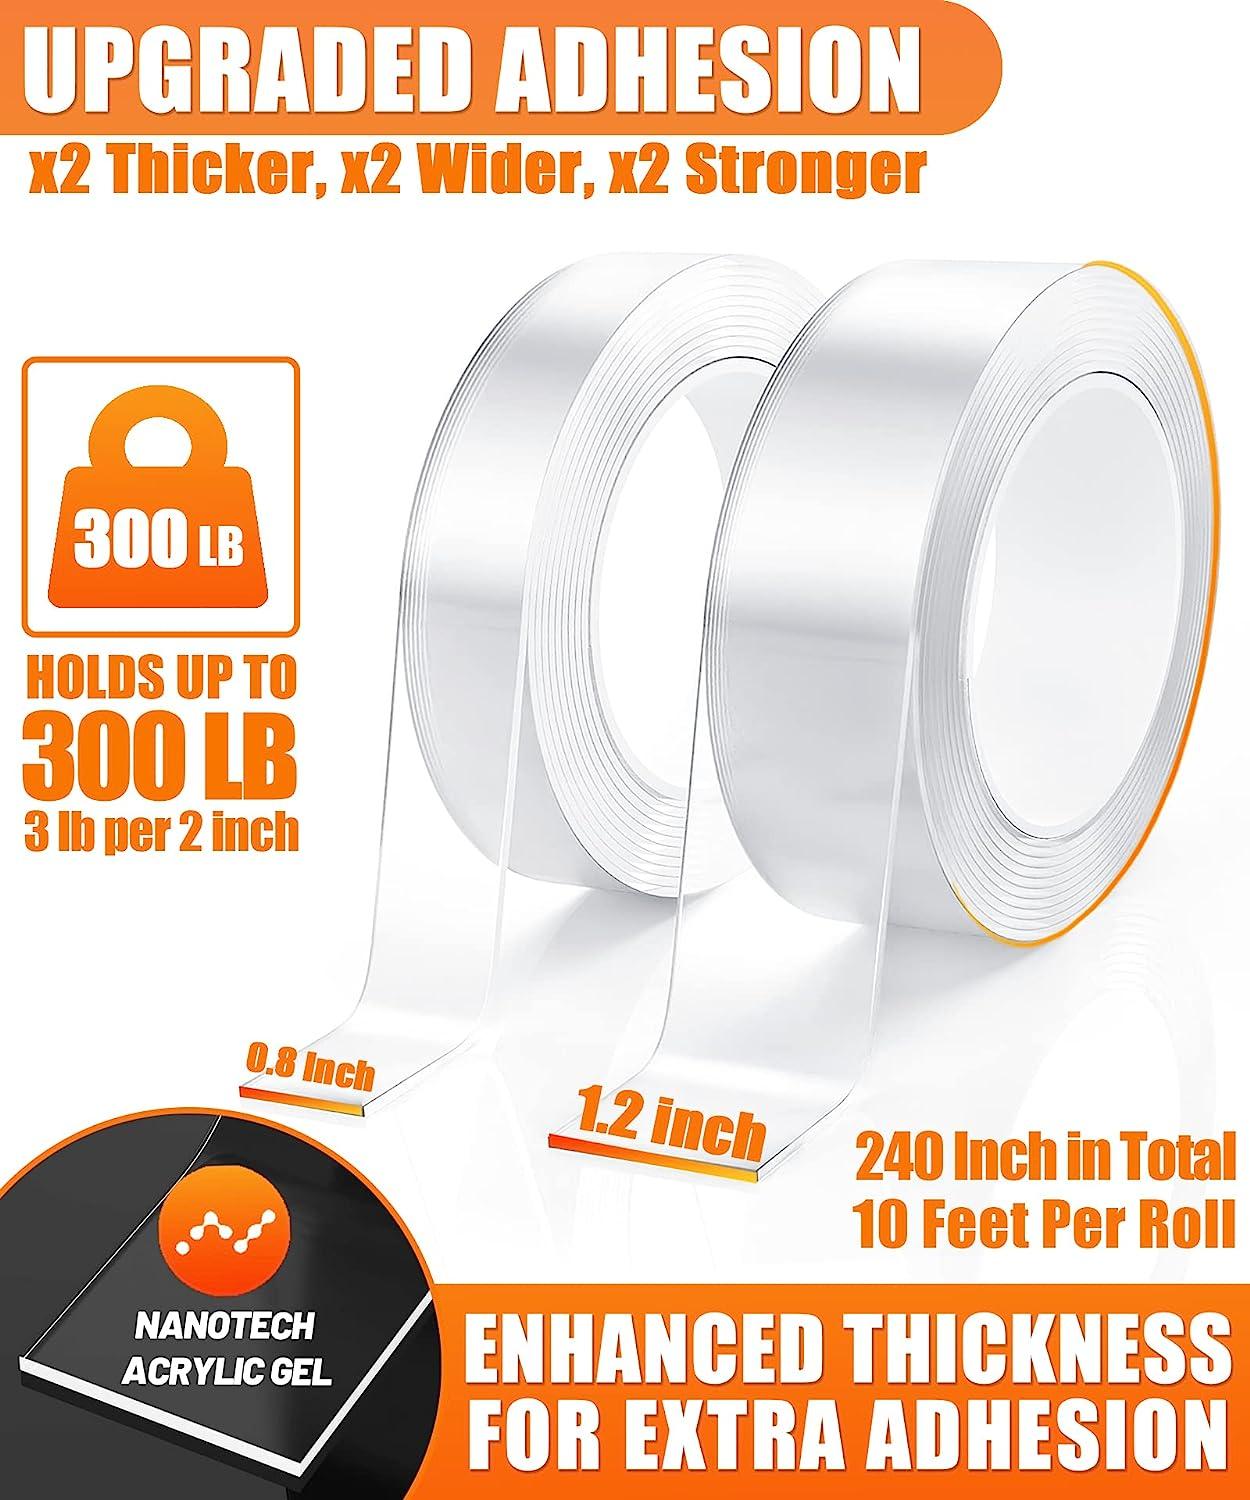 2 Rolls Double Sided Tape Heavy Duty - 240 x 1.2 & 0.8 - Removable